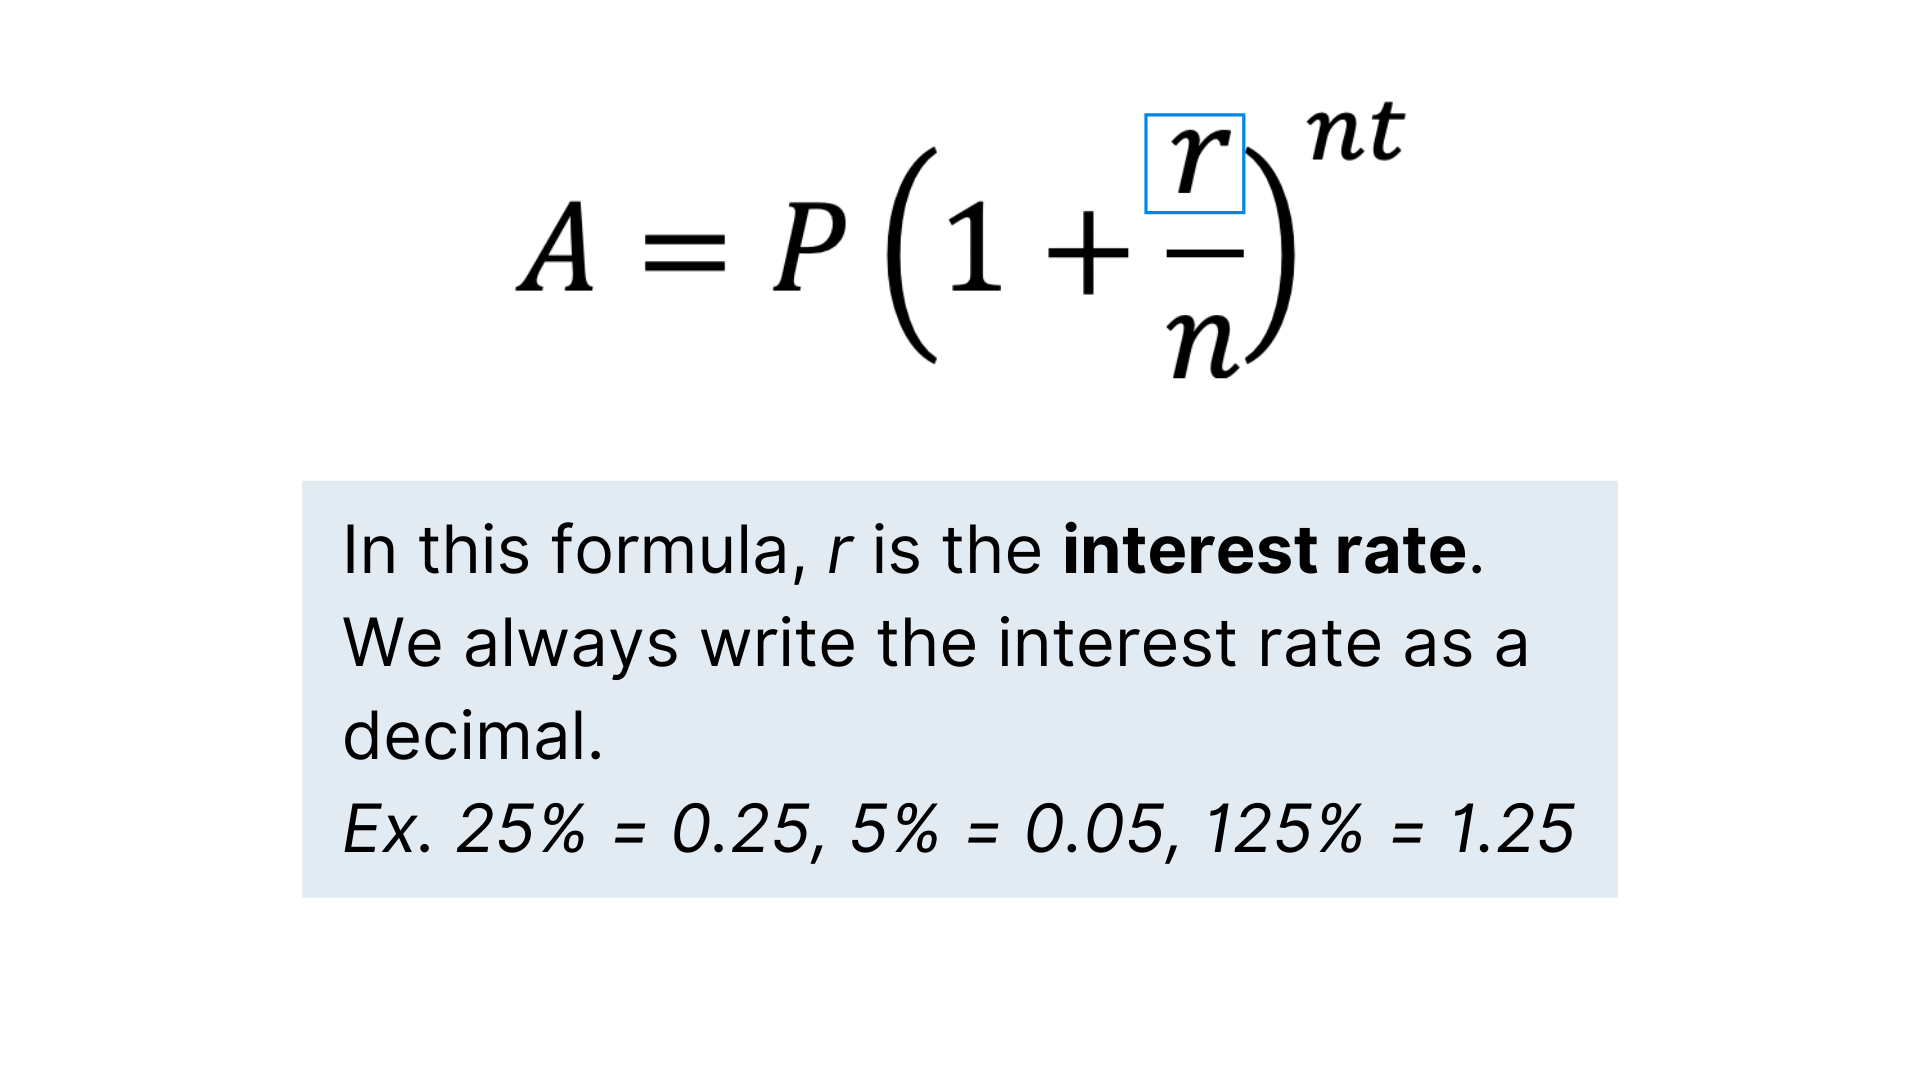 R is the interest rate, always written in decimal form. 